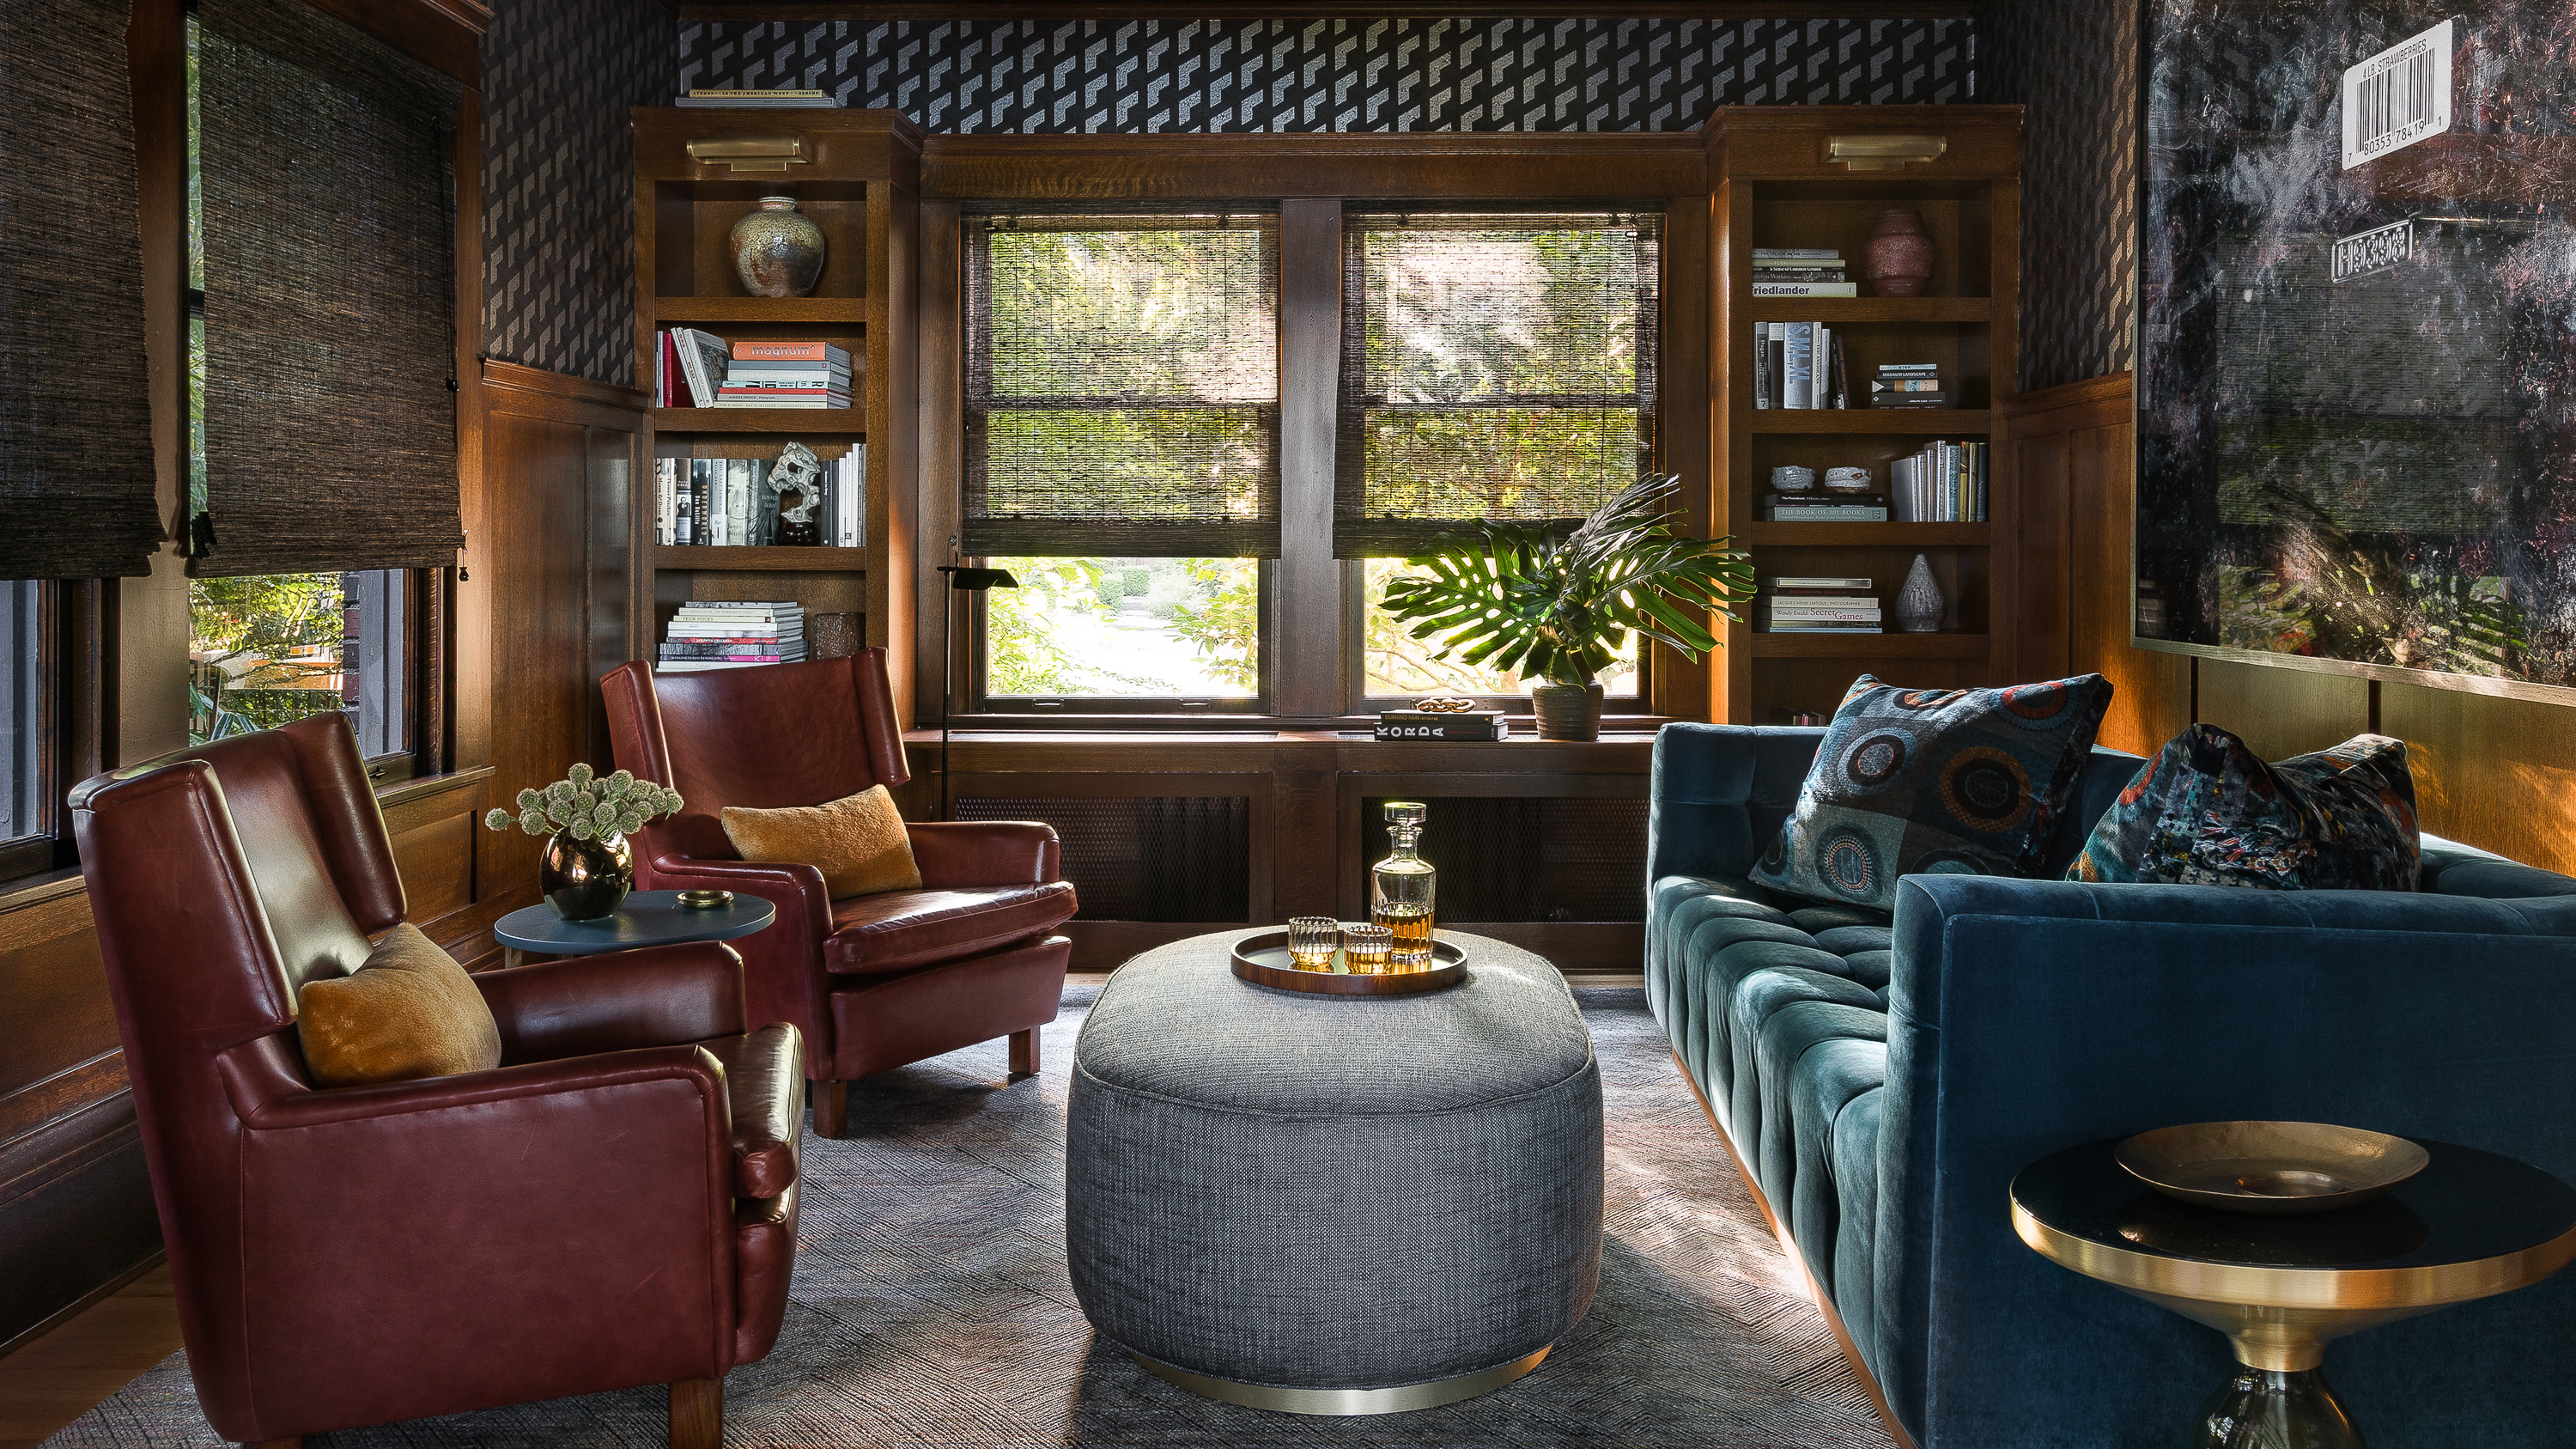 The den exudes a modern English clubroom vibe with vintage Swedish club chairs, a large photograph by Isaac Layman, and Tom Dixon brass accents.